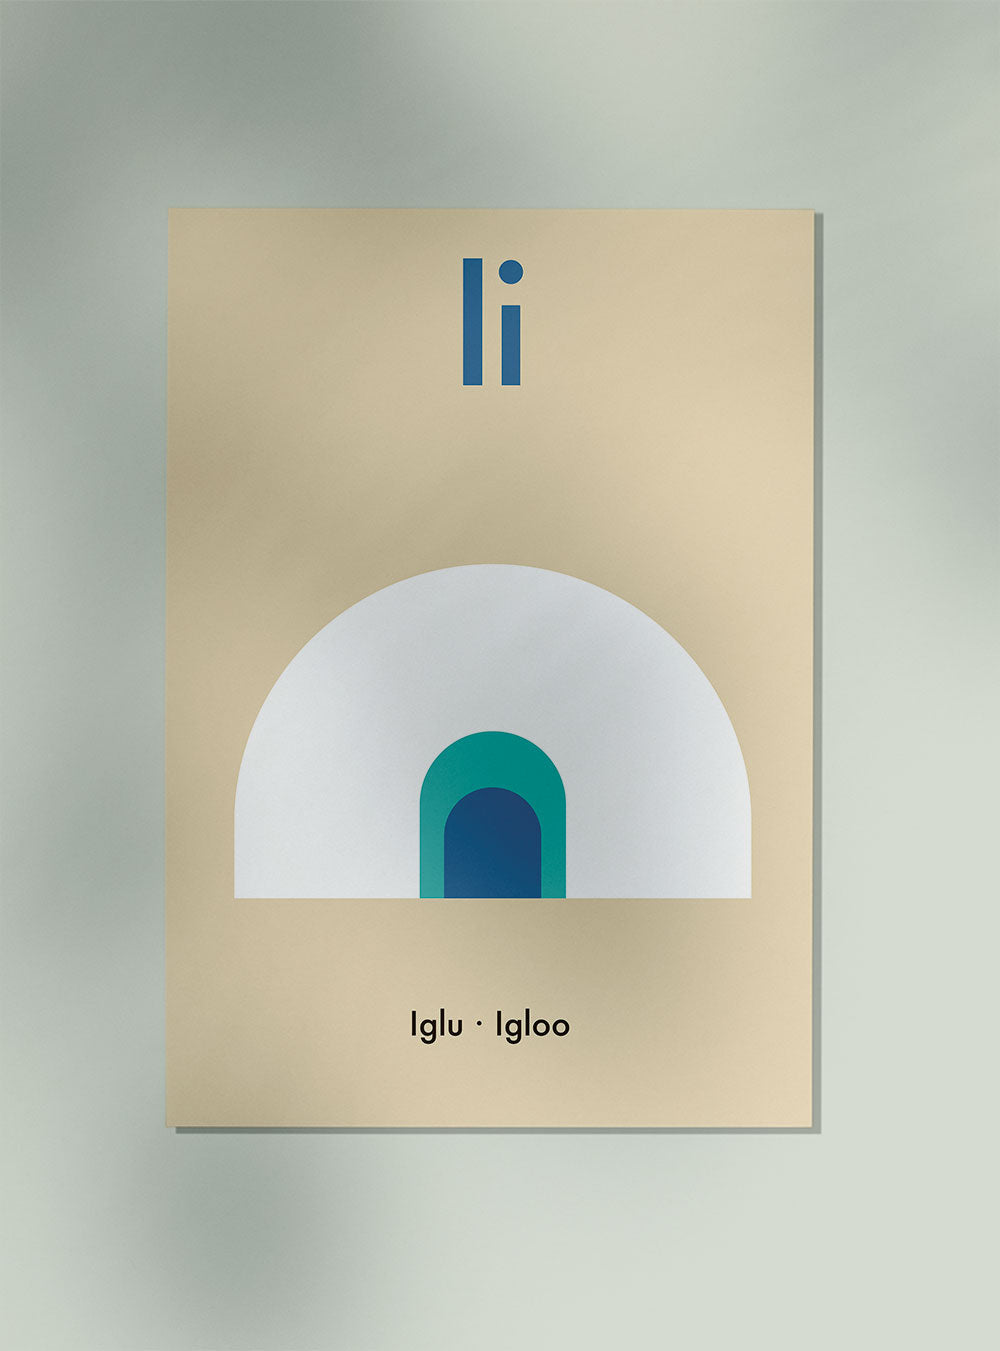 I for igloo - Children's Alphabet Poster in German and English